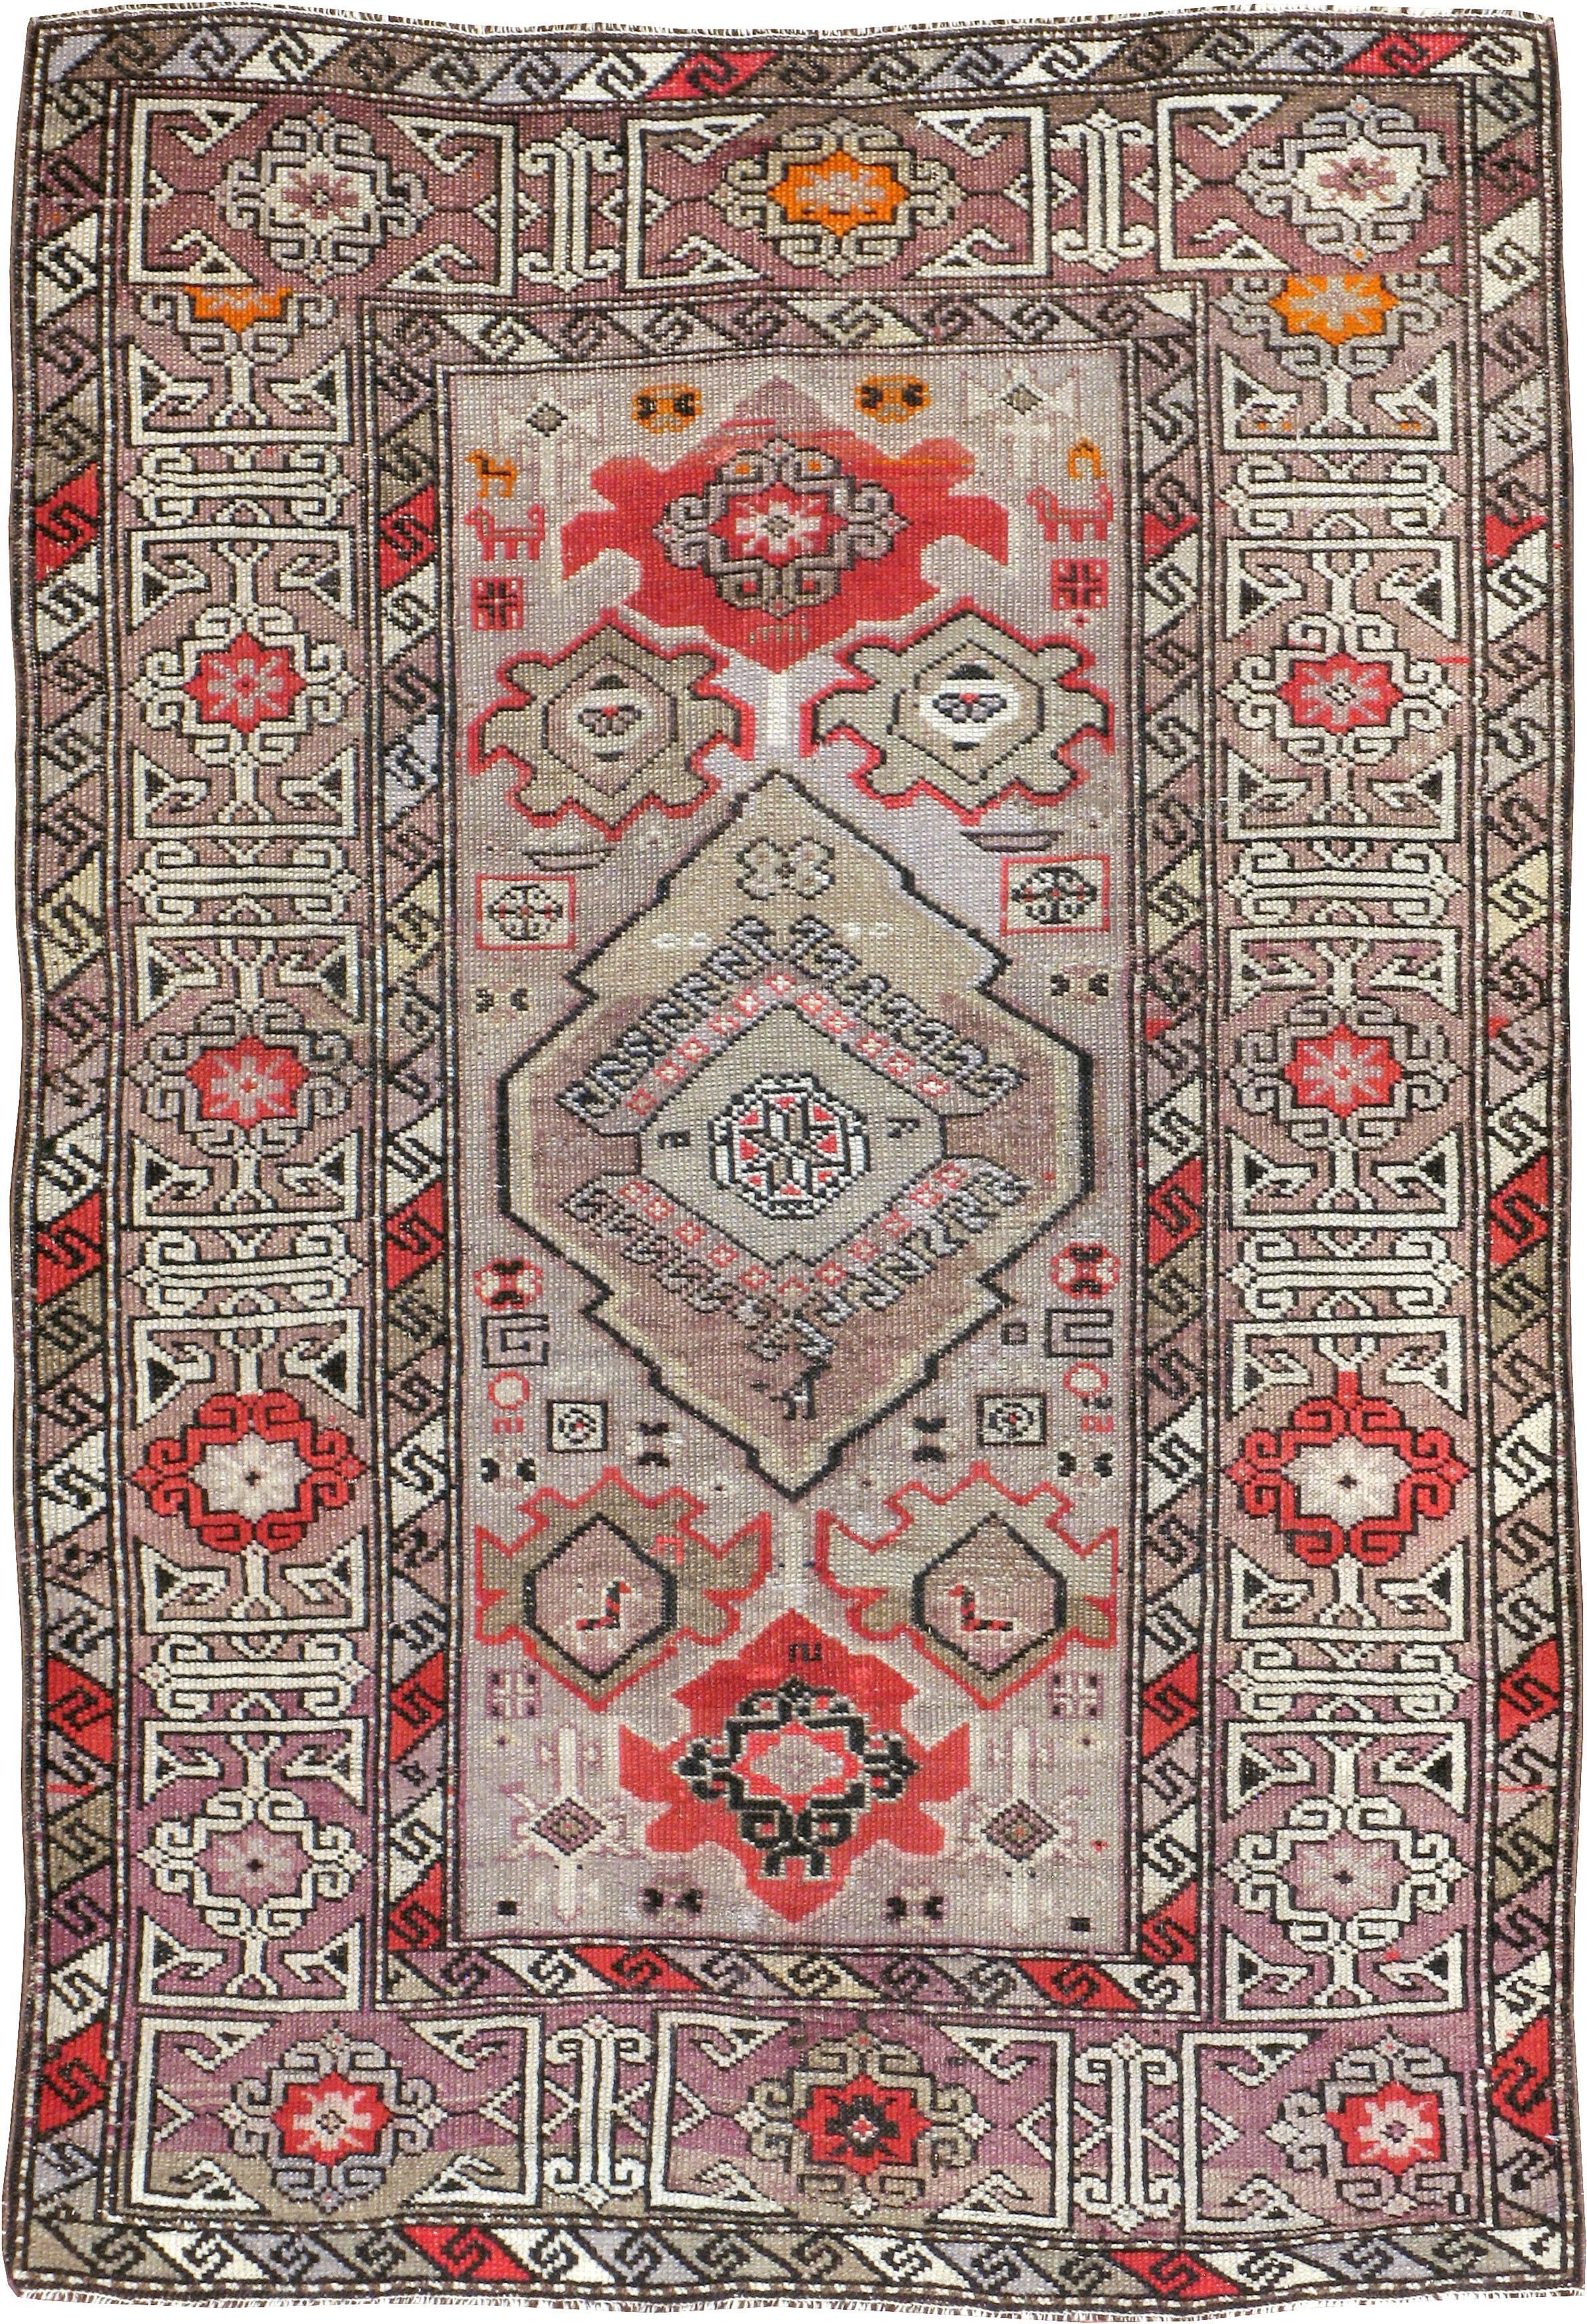 An antique Caucasian carpet from the turn of the 20th century.